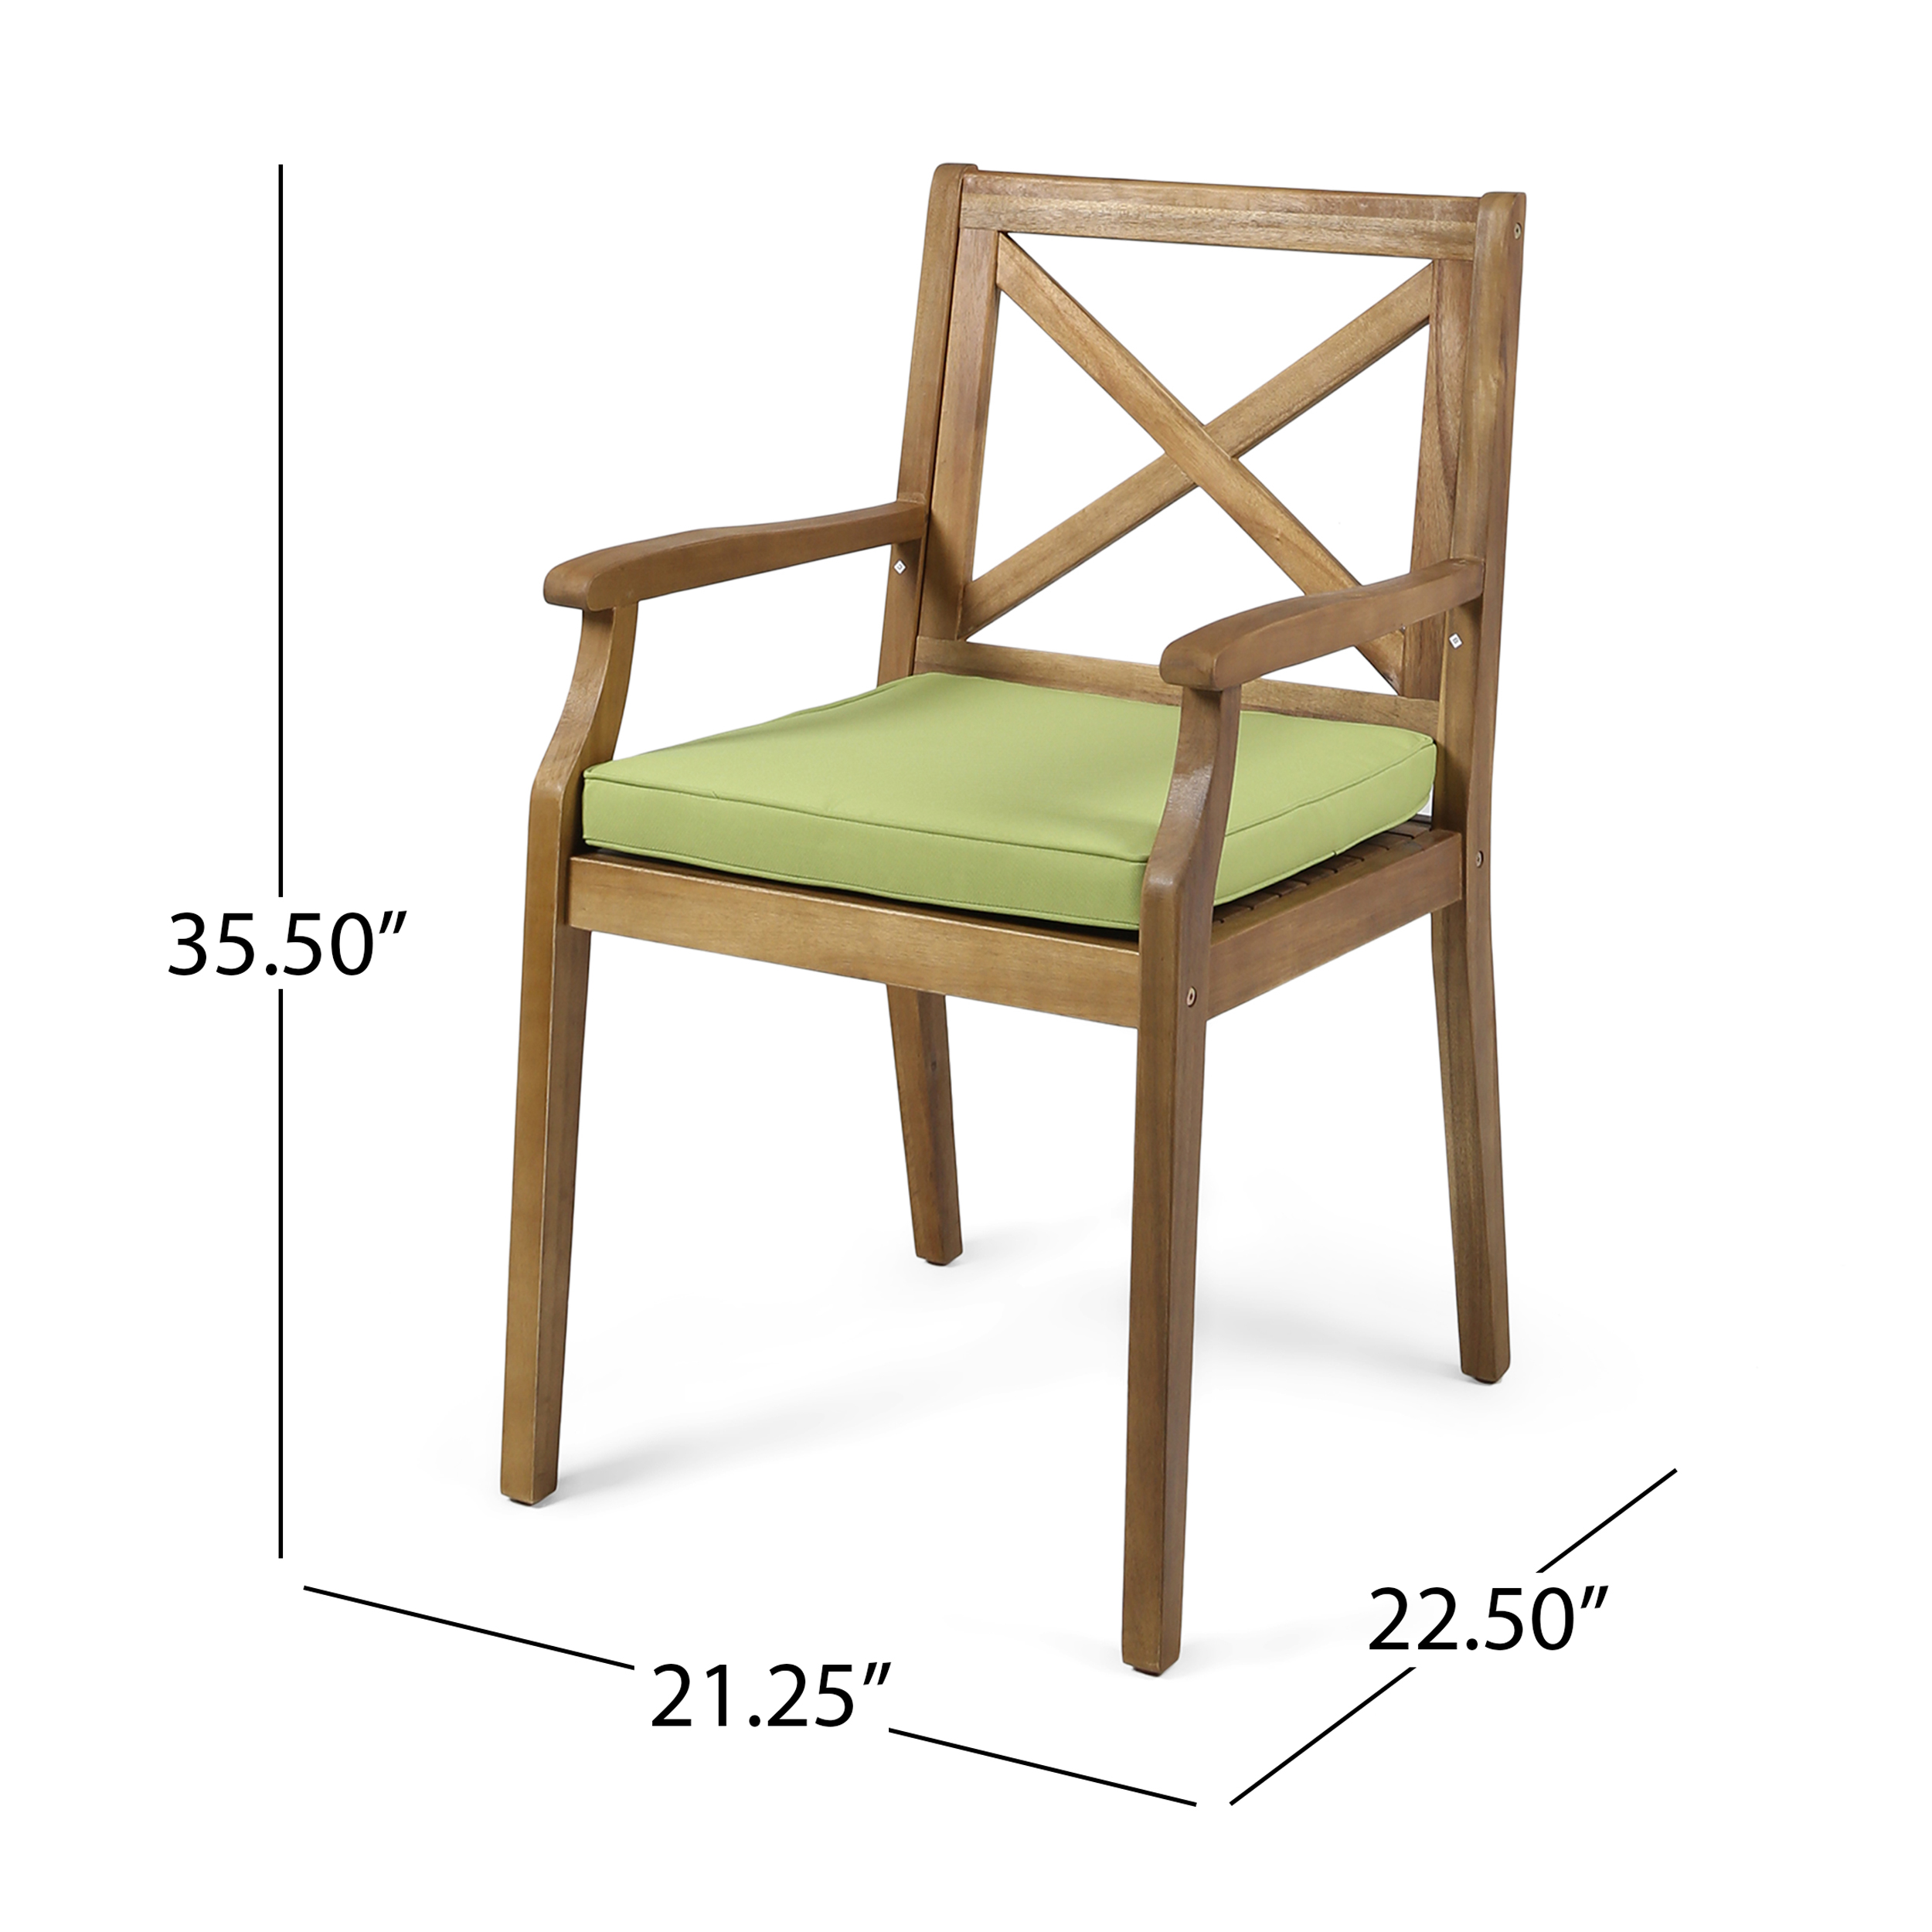 Outdoor Acacia Wood Dining Chair with Cushions, Teak,Green - image 5 of 6